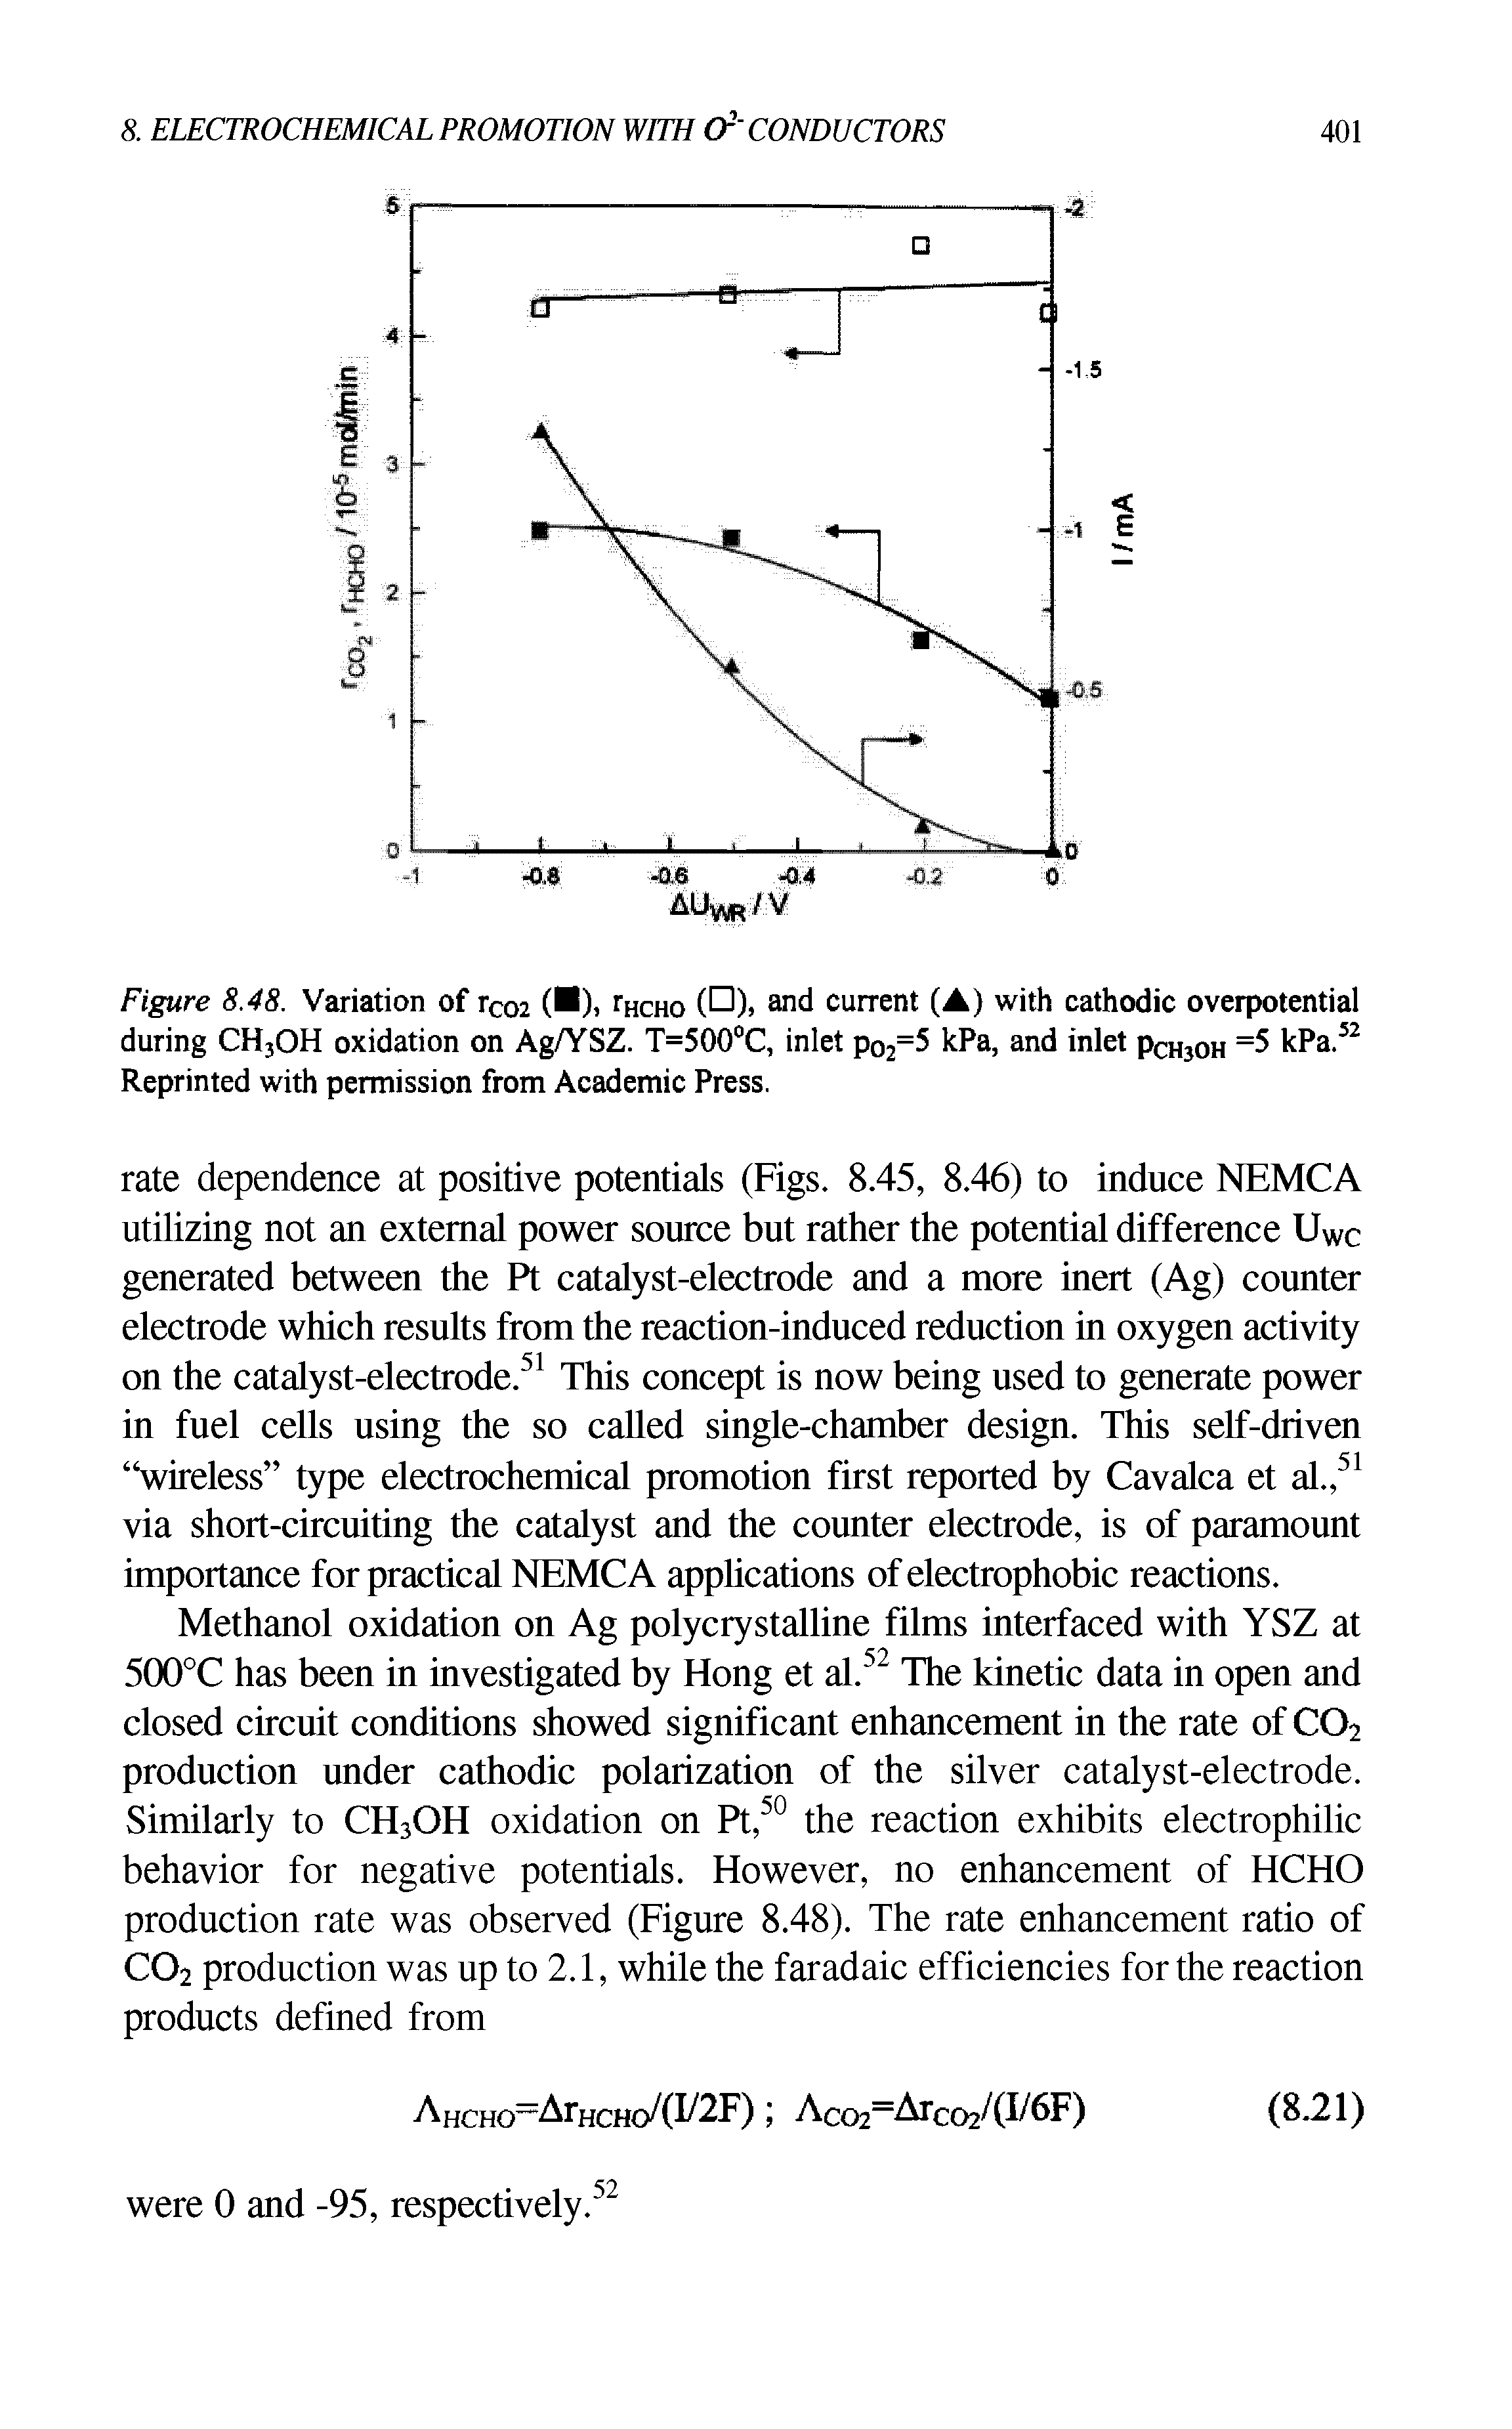 Figure 8.48. Variation of rco2 (B), rHcHO (D)s and current (A) with cathodic overpotential during CH3OH oxidation on Ag/YSZ. T=500°C, inlet po2=5 kPa, and inlet PCH3OH =5 kPa.52 Reprinted with permission from Academic Press.